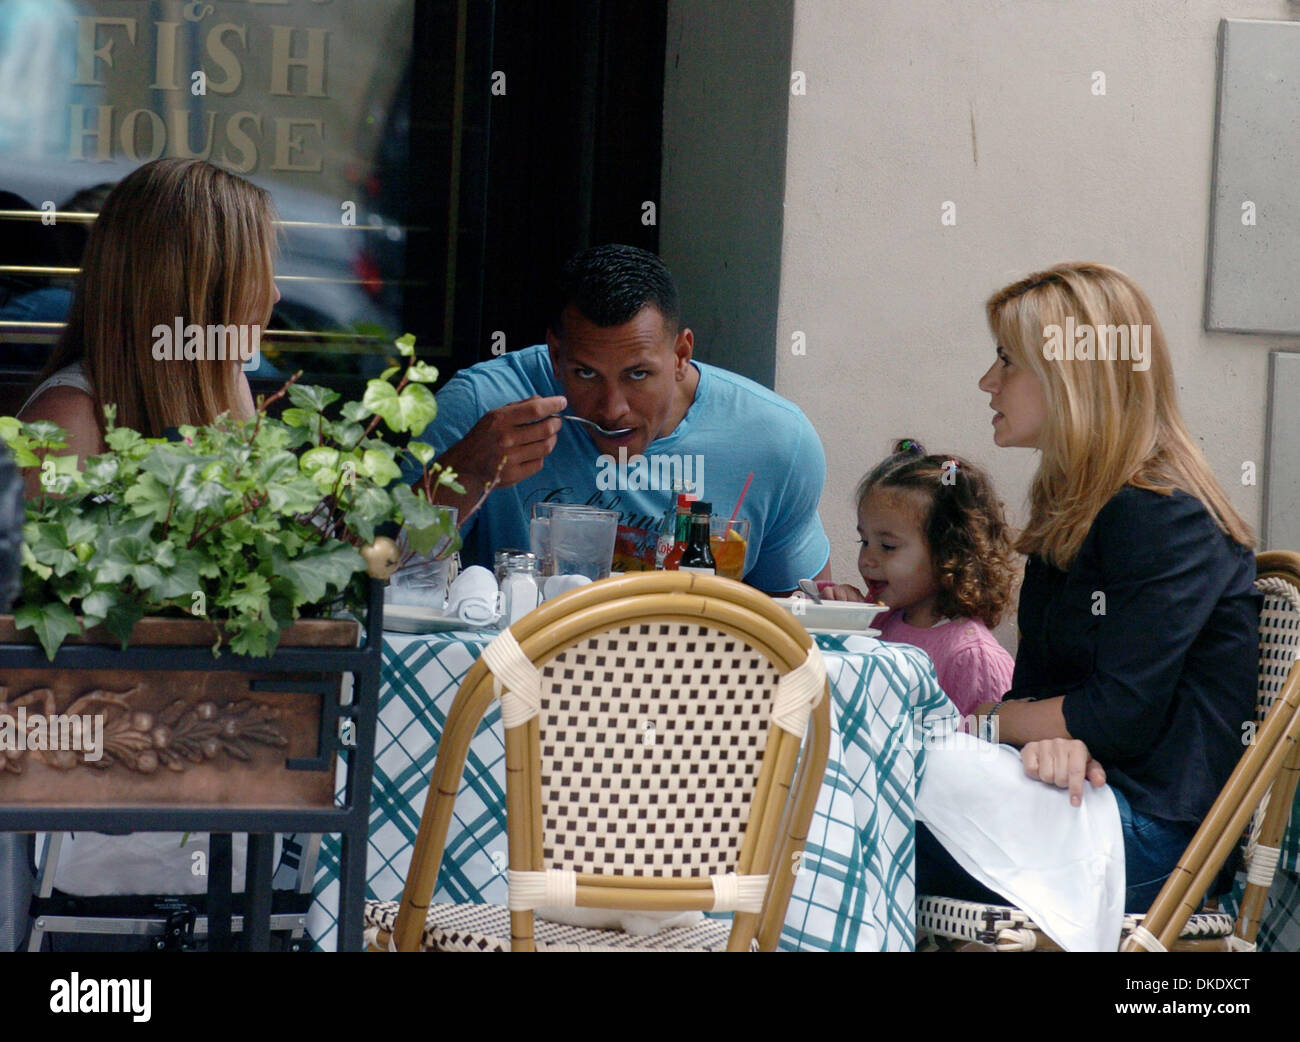 Jun 06, 2007 - Chicago, IL, USA - An unidentified friend (L) with ALEX RODRIGUEZ and his wife CYNTHIA have lunch at Hugo's Frog Bar  while out in Chicago. Alex Rodriguez spent the afternoon having lunch and coffee with his family as rumors of an alleged affair with a blond stripper splashed across the headlines last week.  (Credit Image: © Bryan Smith/ZUMA Press) RESTRICTIONS: New  Stock Photo